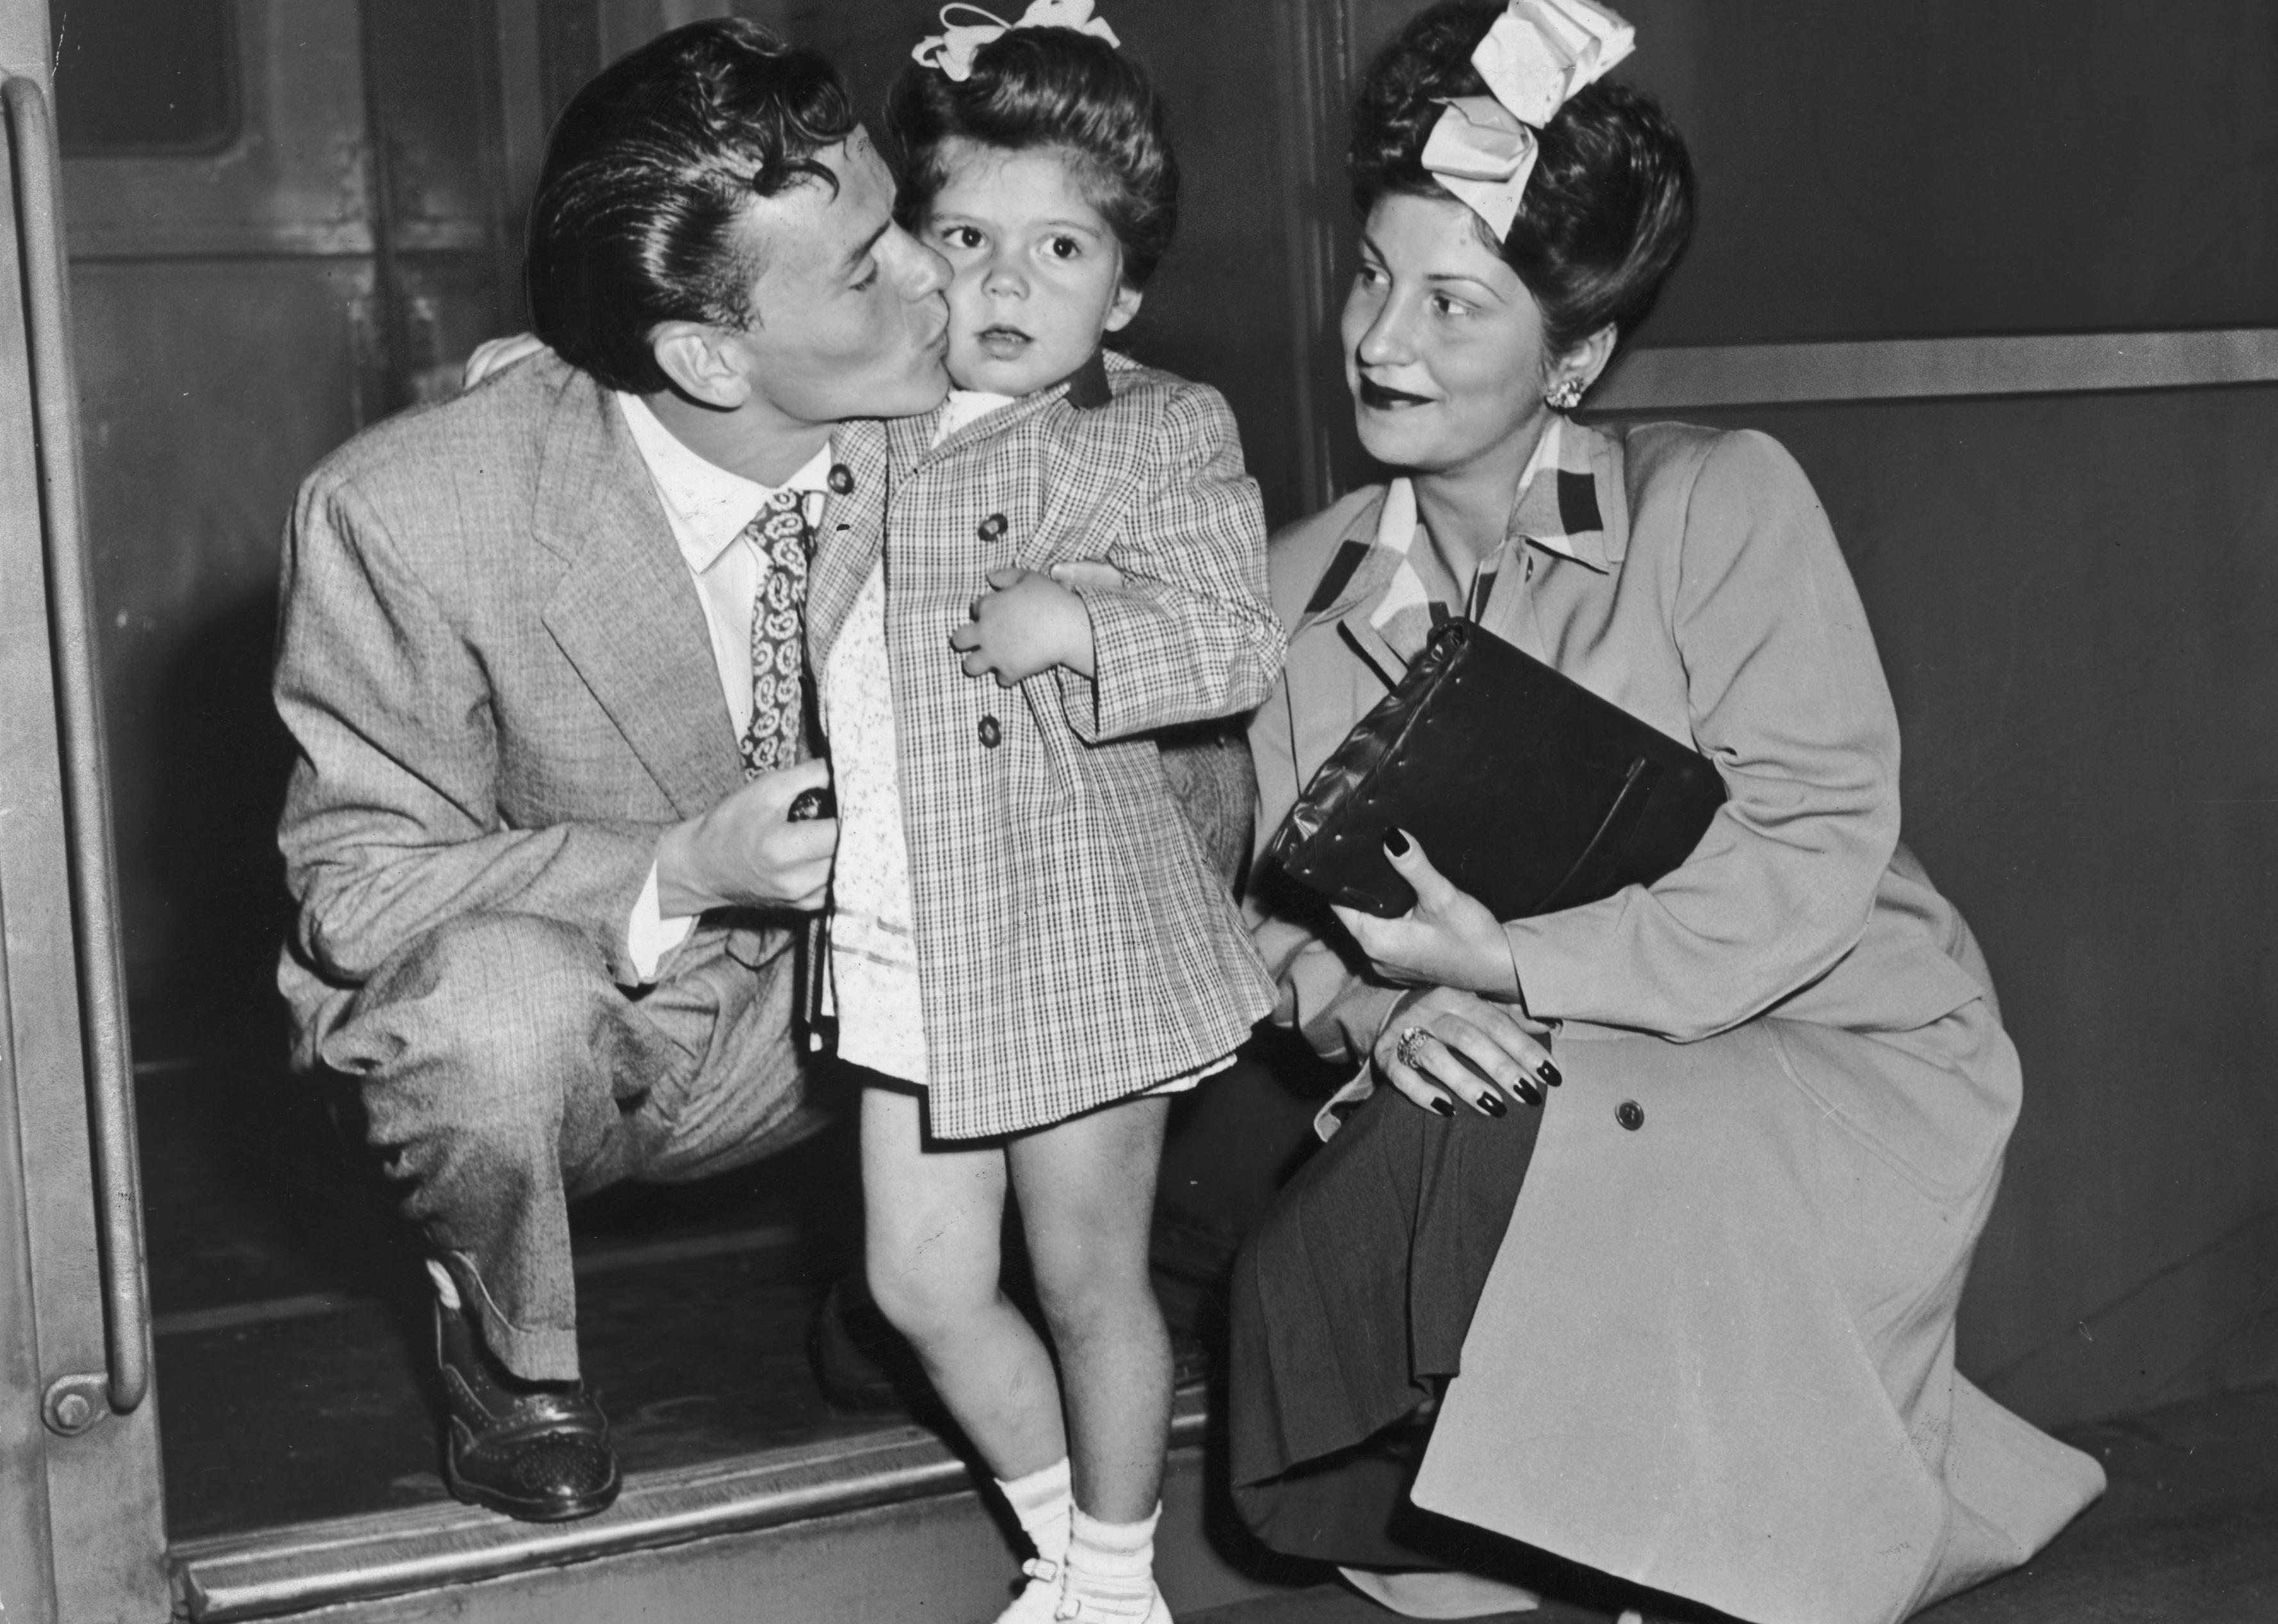 Frank Sinatra crouches to kiss his daughter, Nancy Jr. while his wife watches at a train platform. 